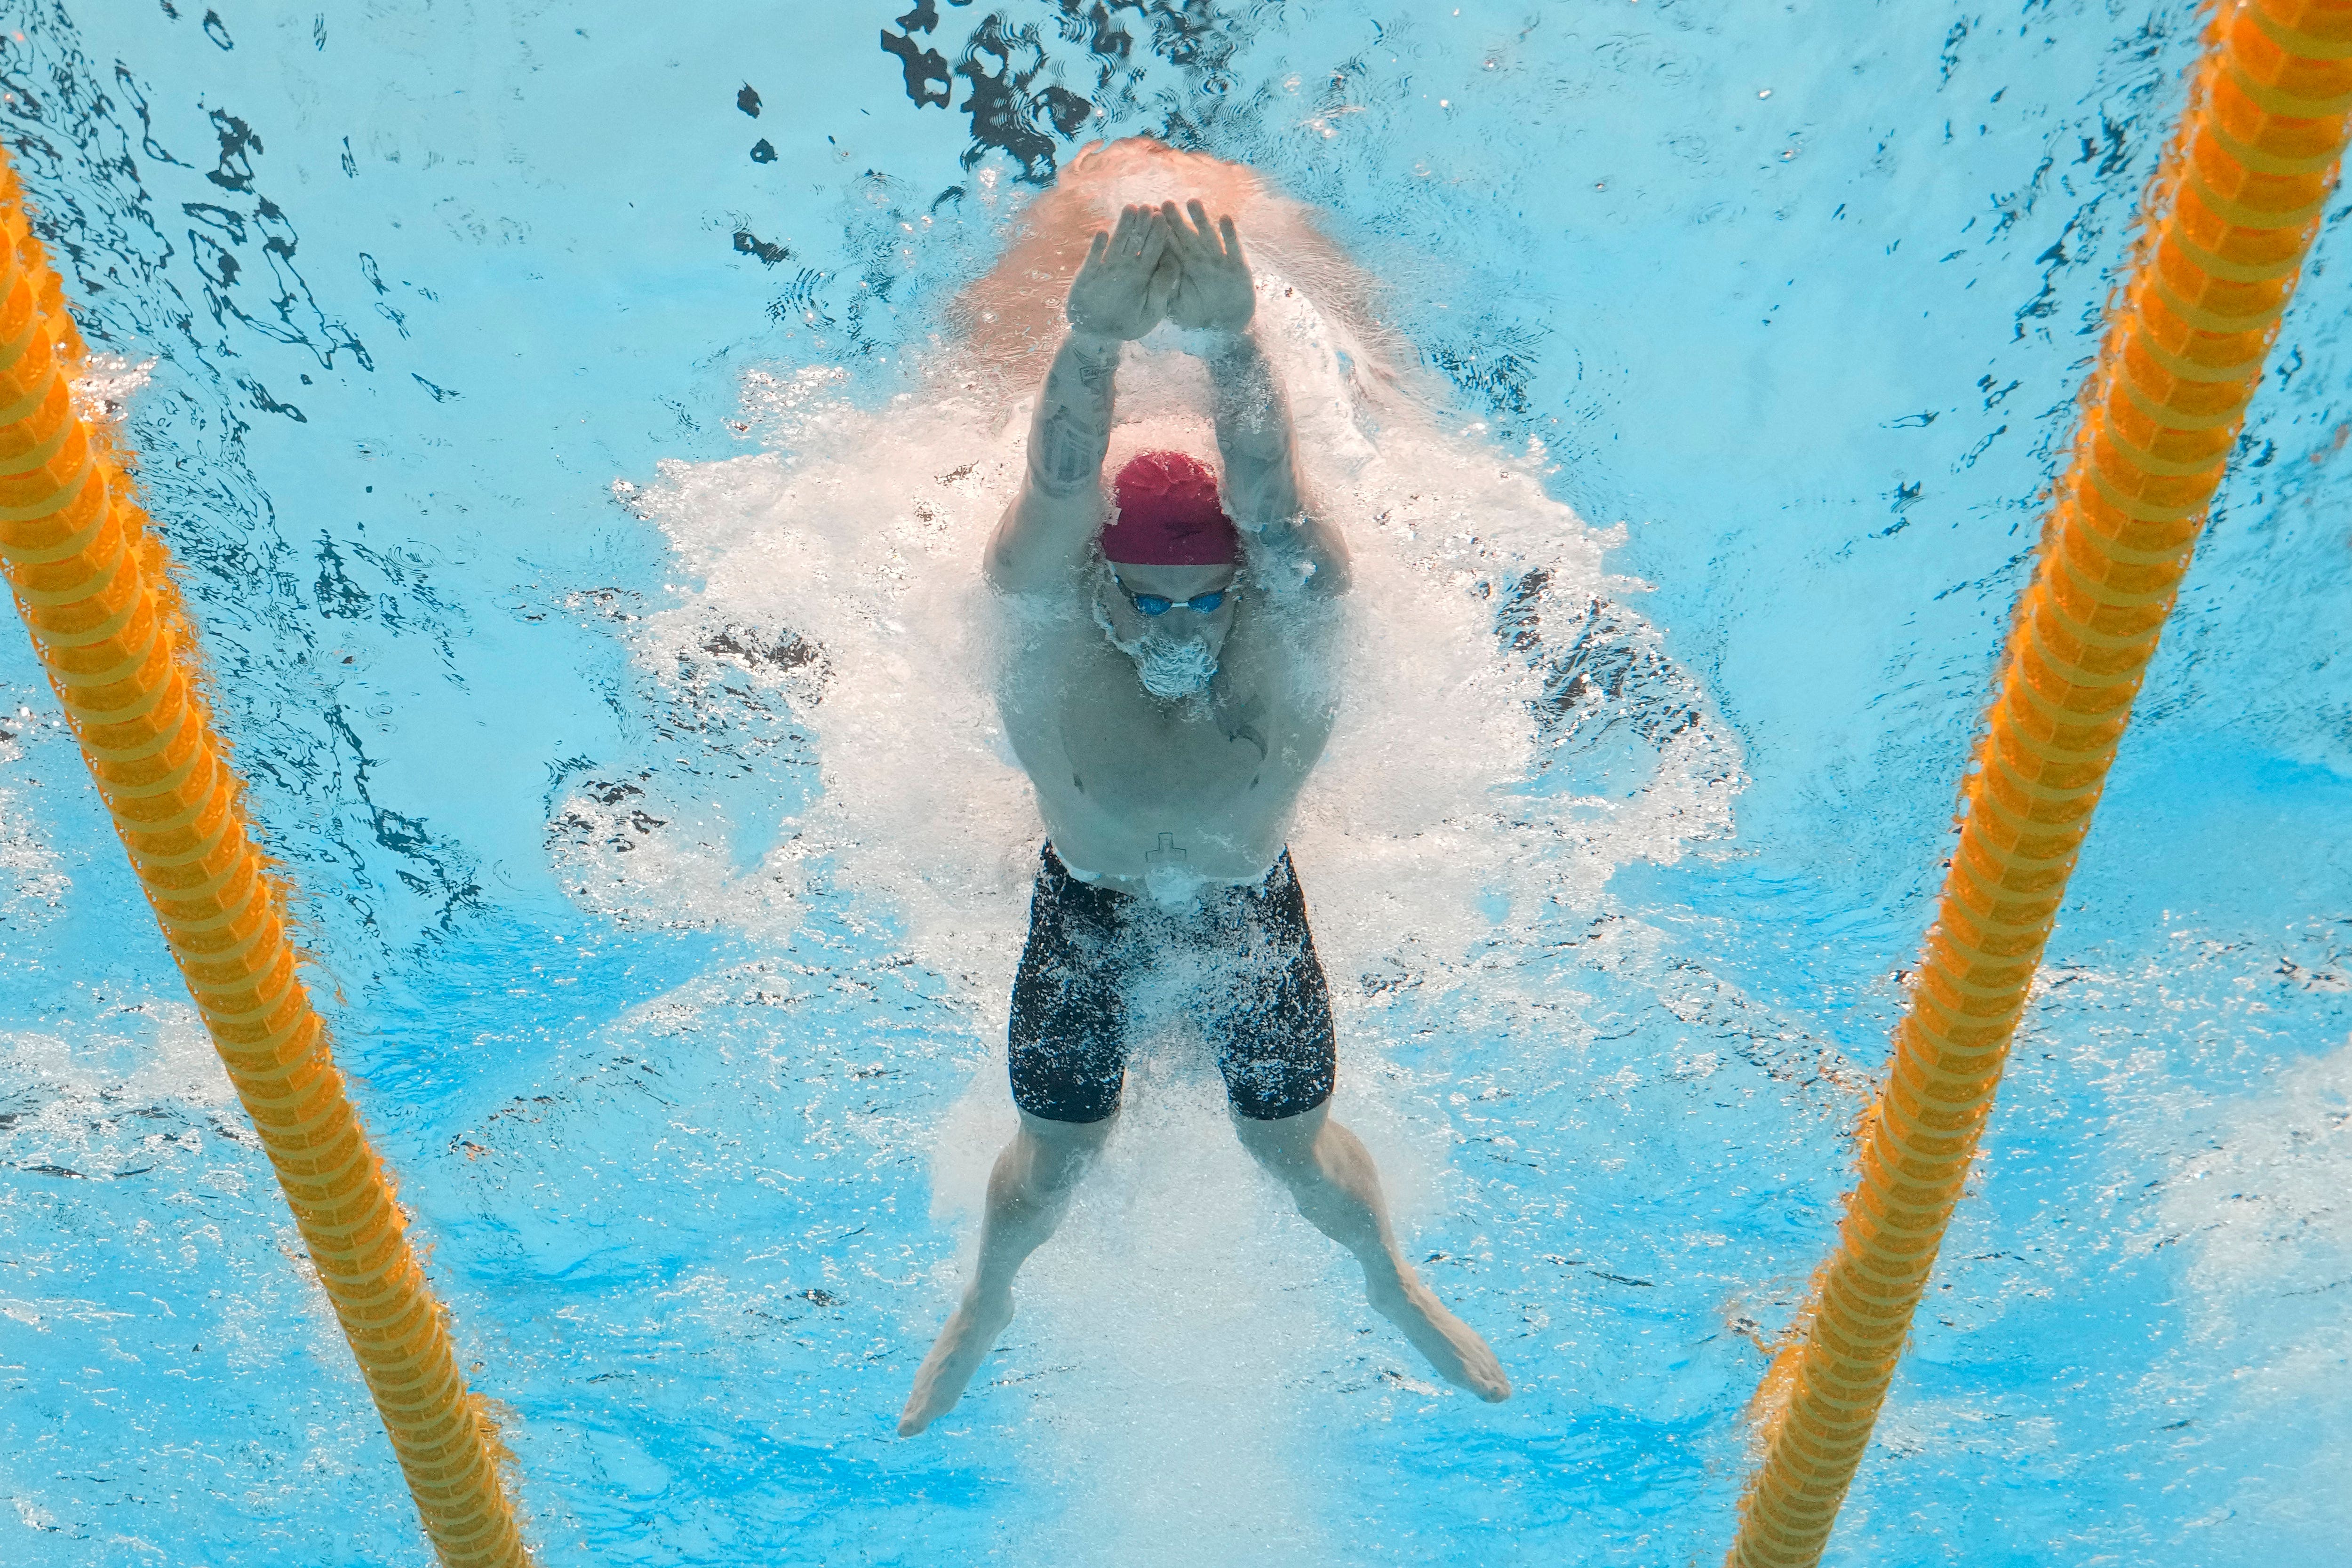 Adam Peaty qualified fastest for the final (AP Photo/Lee Jin-man)